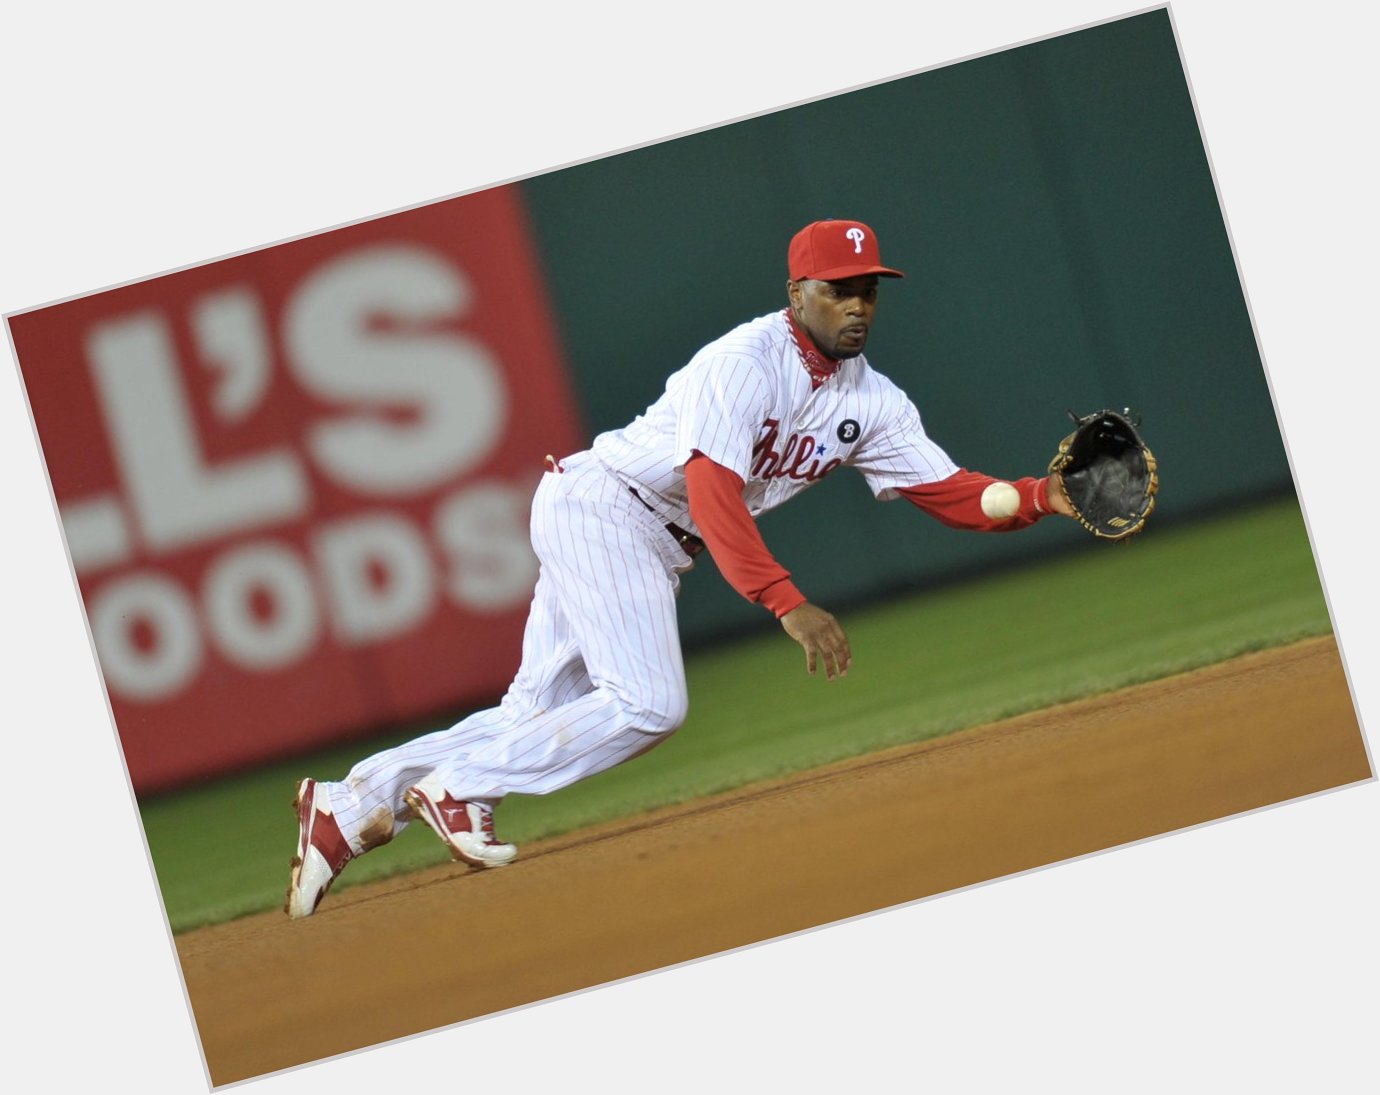 Happy Birthday to Jimmy Rollins, who turns 36 today! 